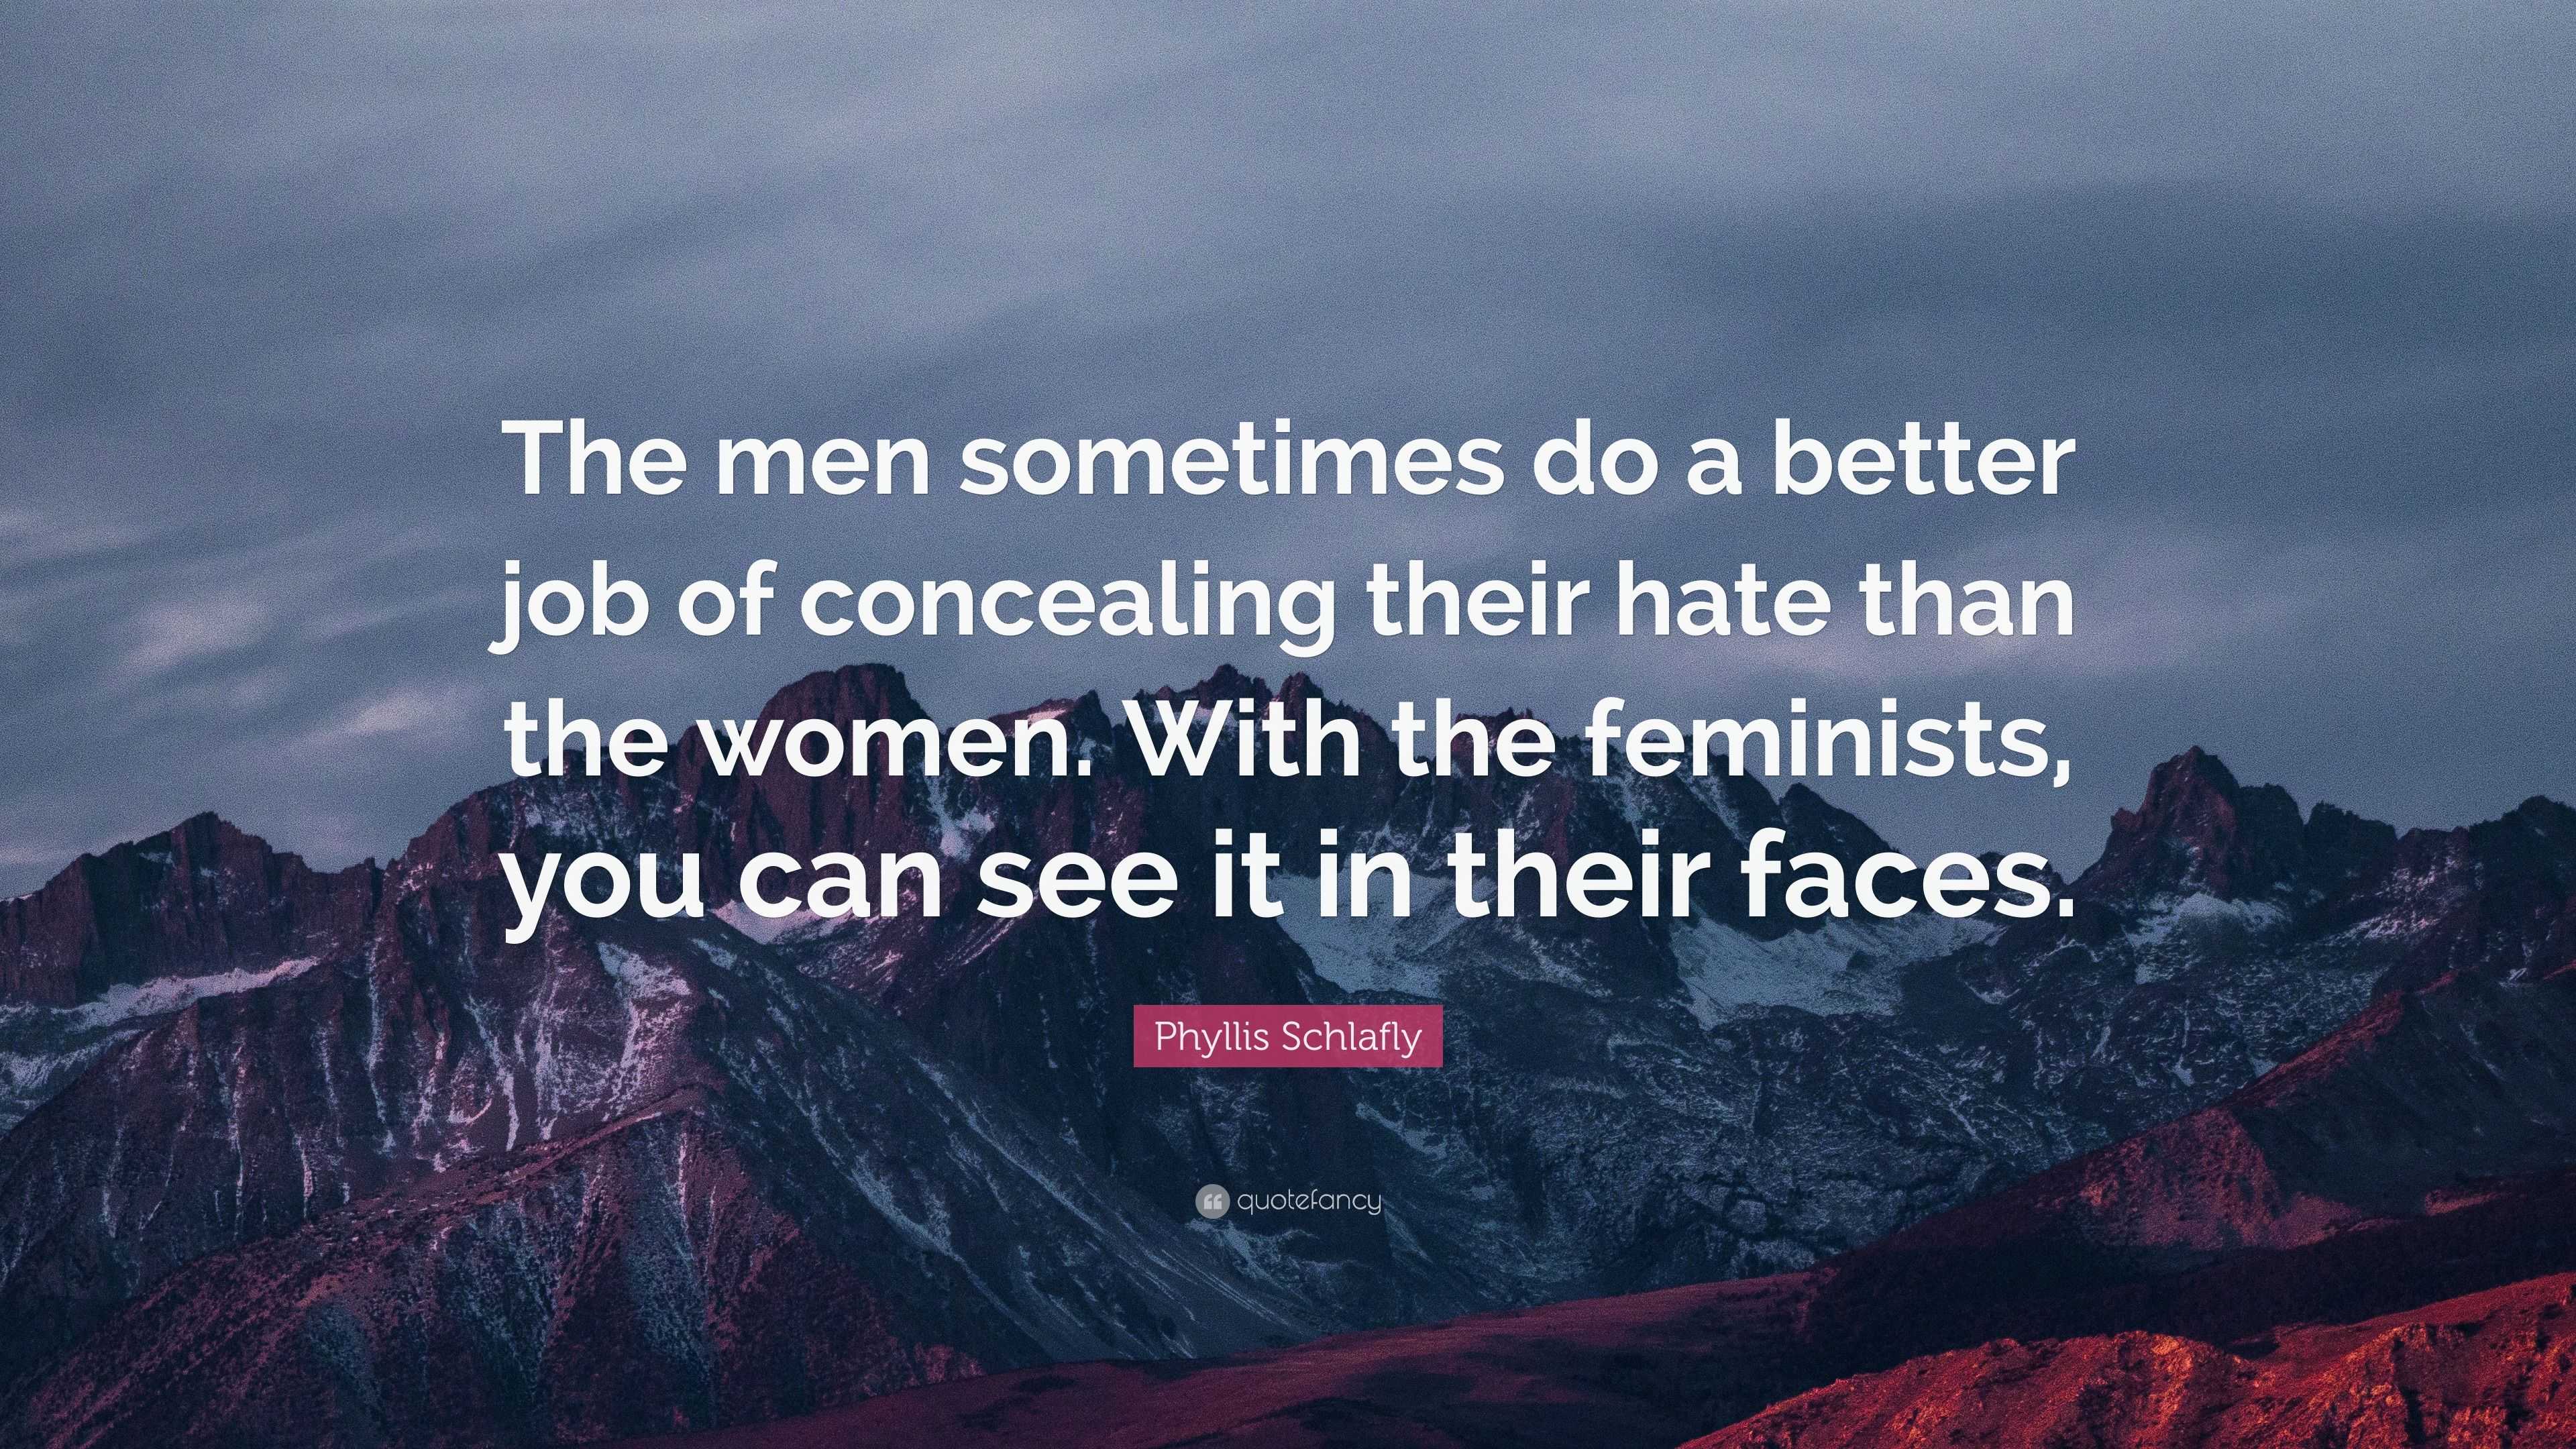 Phyllis Schlafly Quote: “The men sometimes do a better job of ...